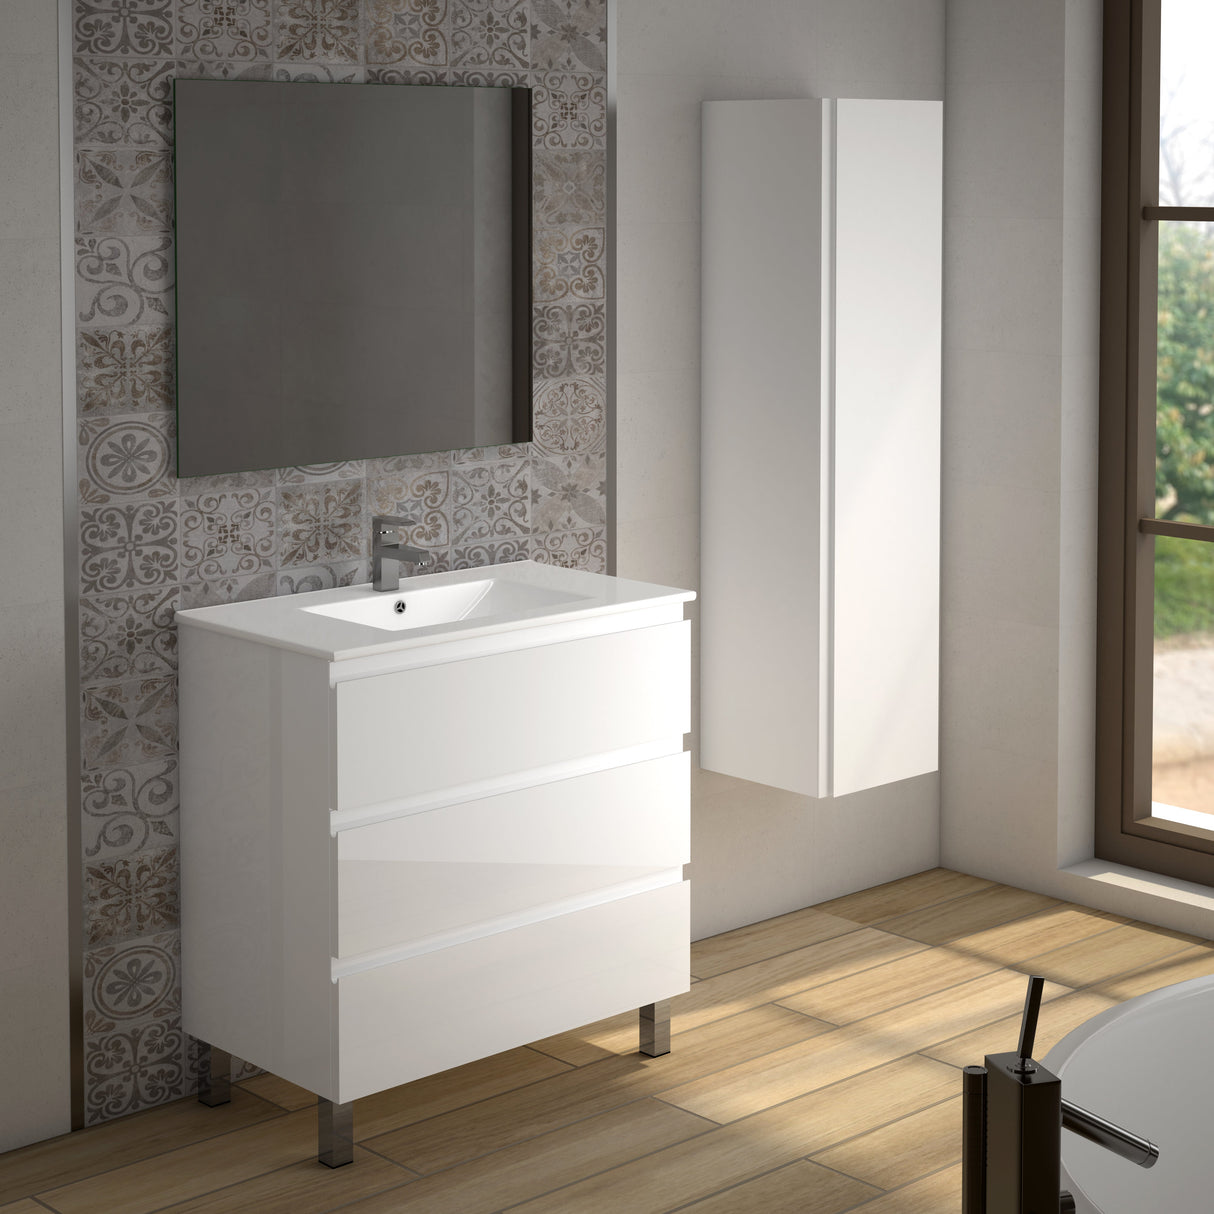 DAX Costa Engineered Wood and Porcelain Basin Single Vanity Cabinet, 36", White DAX-COS013611-ONX